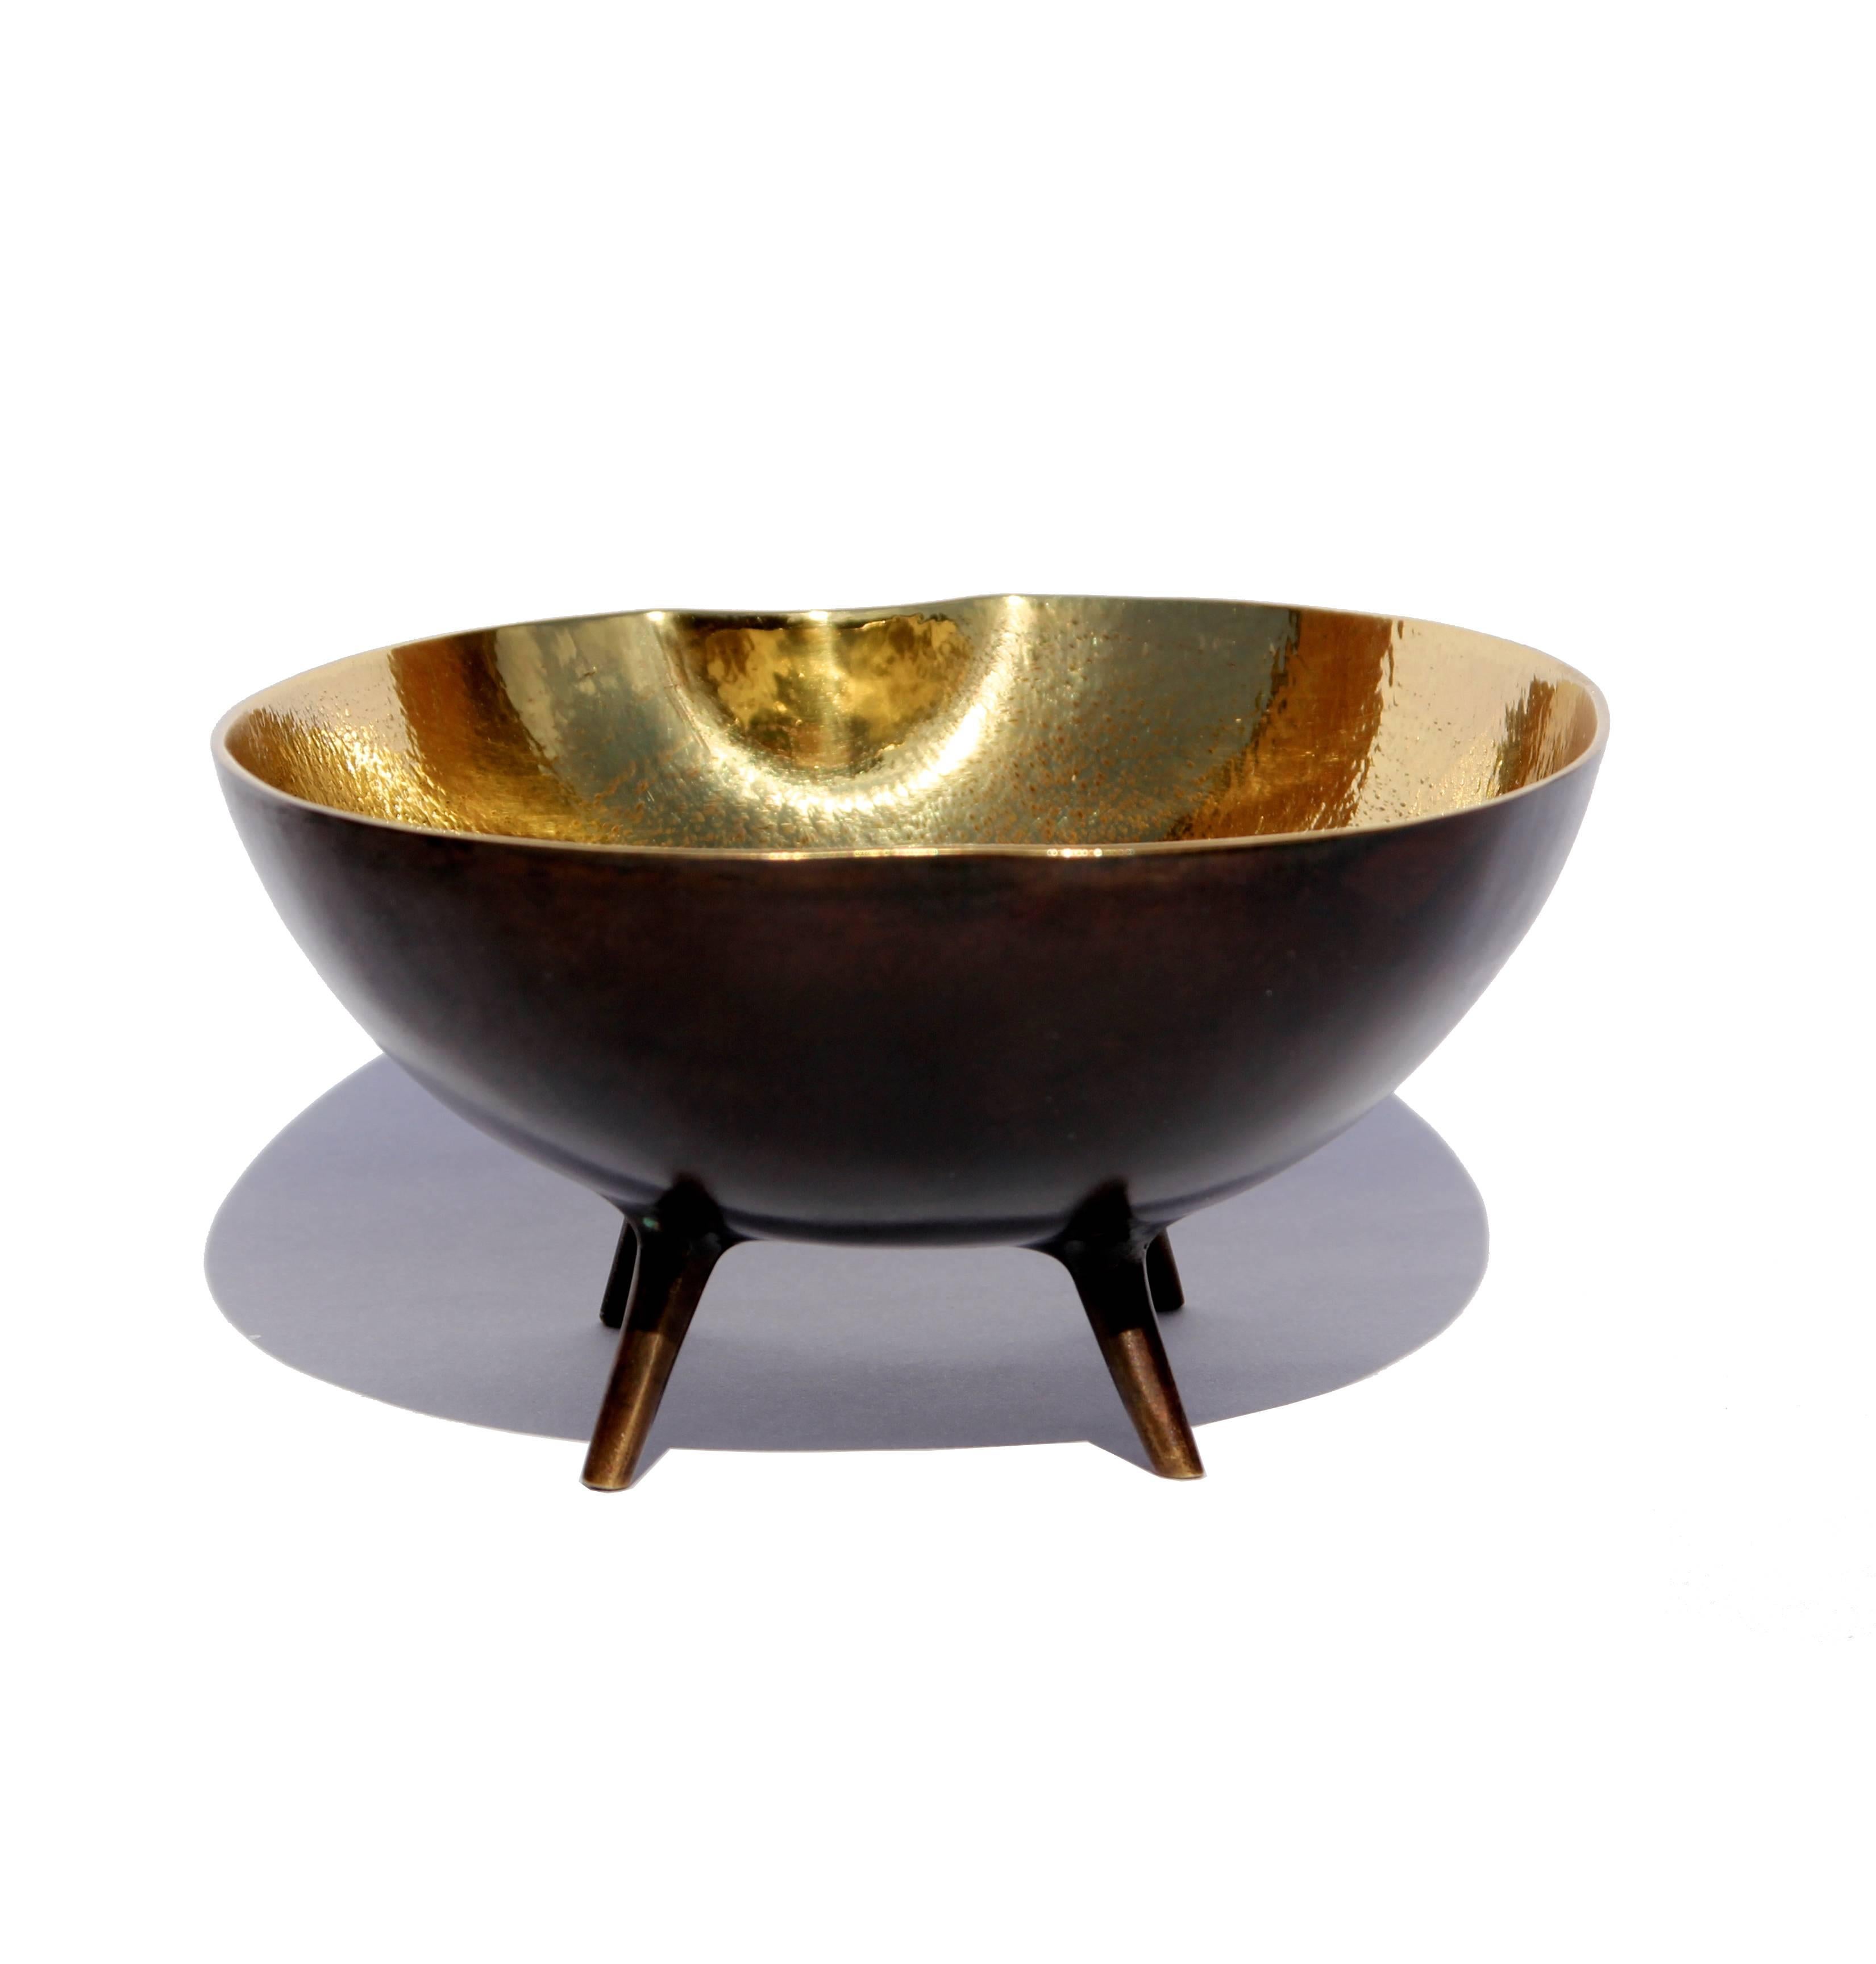 Handmade cast brass bowl legs with a bronze patina on the outside and textured polished brass on the inside.

Each of these charming, original and elegant bowls is handmade individually. Cast using very traditional techniques, the noble material